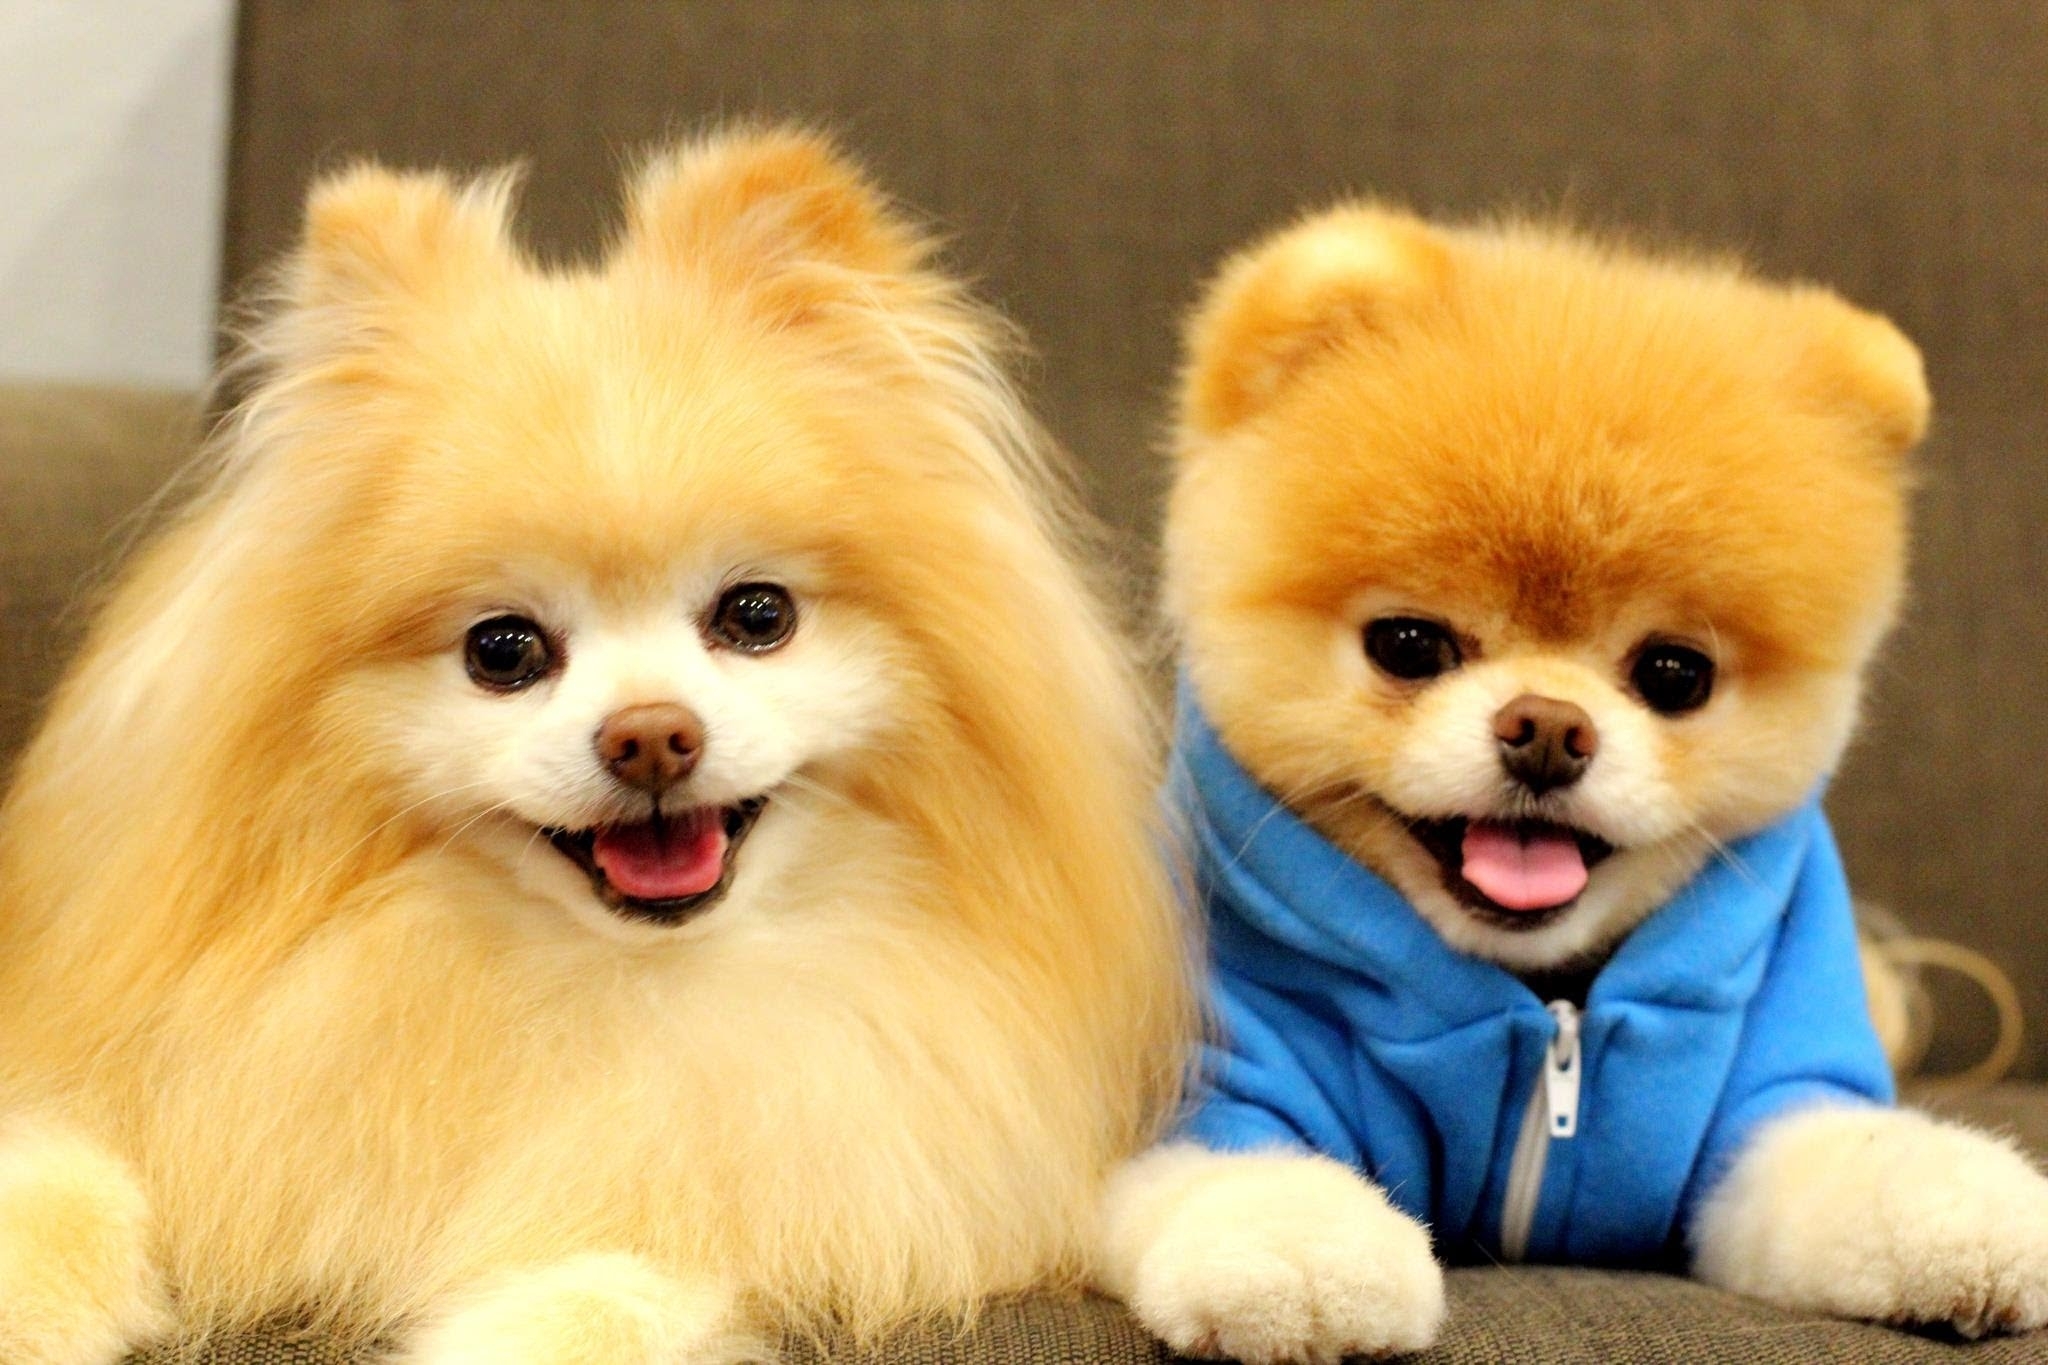 10 Latest Cute Baby Dogs Images FULL HD 1920×1080 For PC Desktop